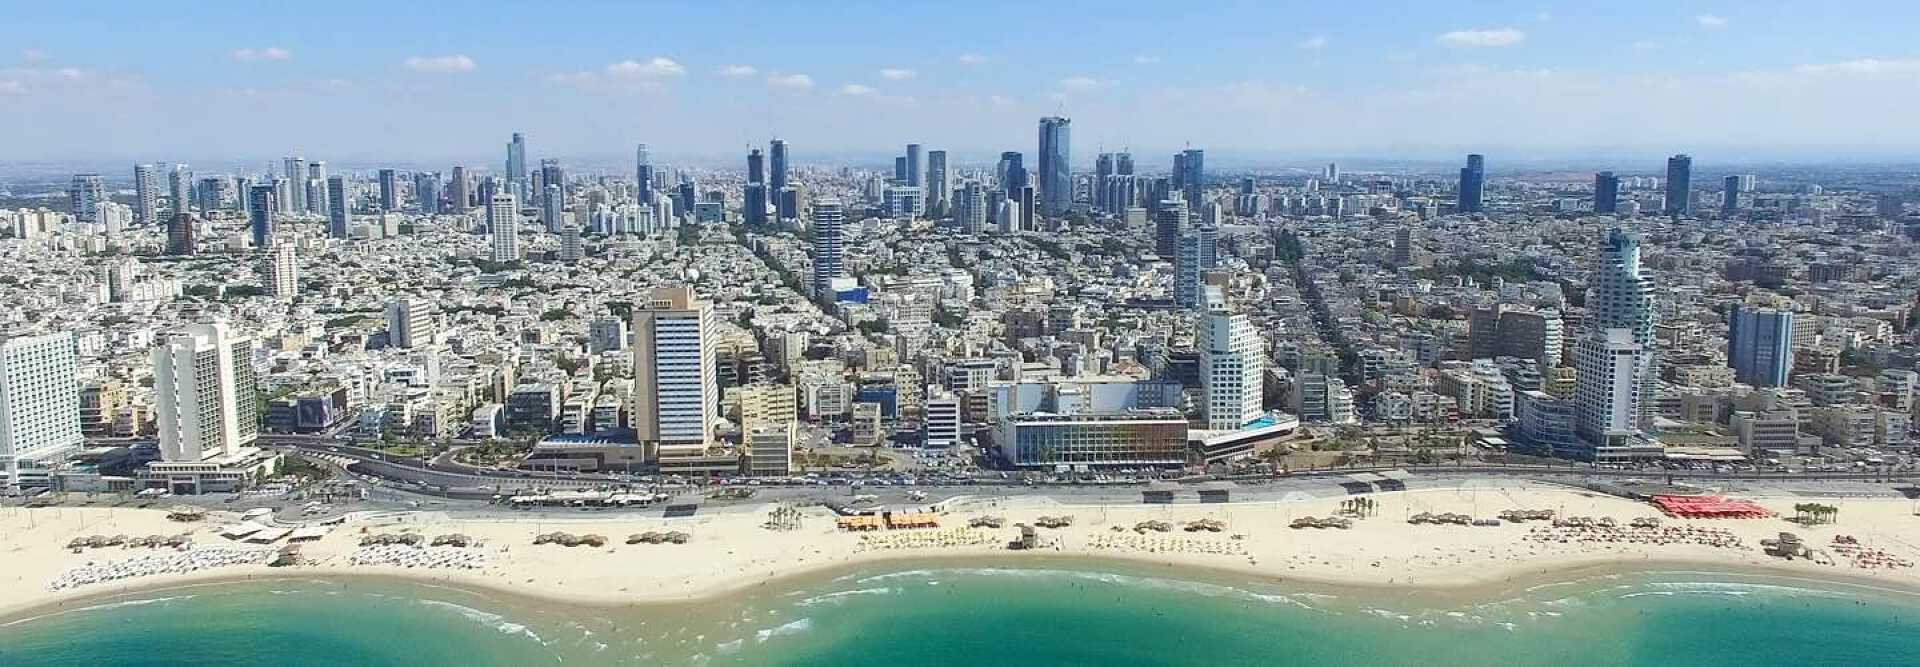 Photo of Tel aviv in Israel with, in the foreground, a beach, in the background, skyscrapers